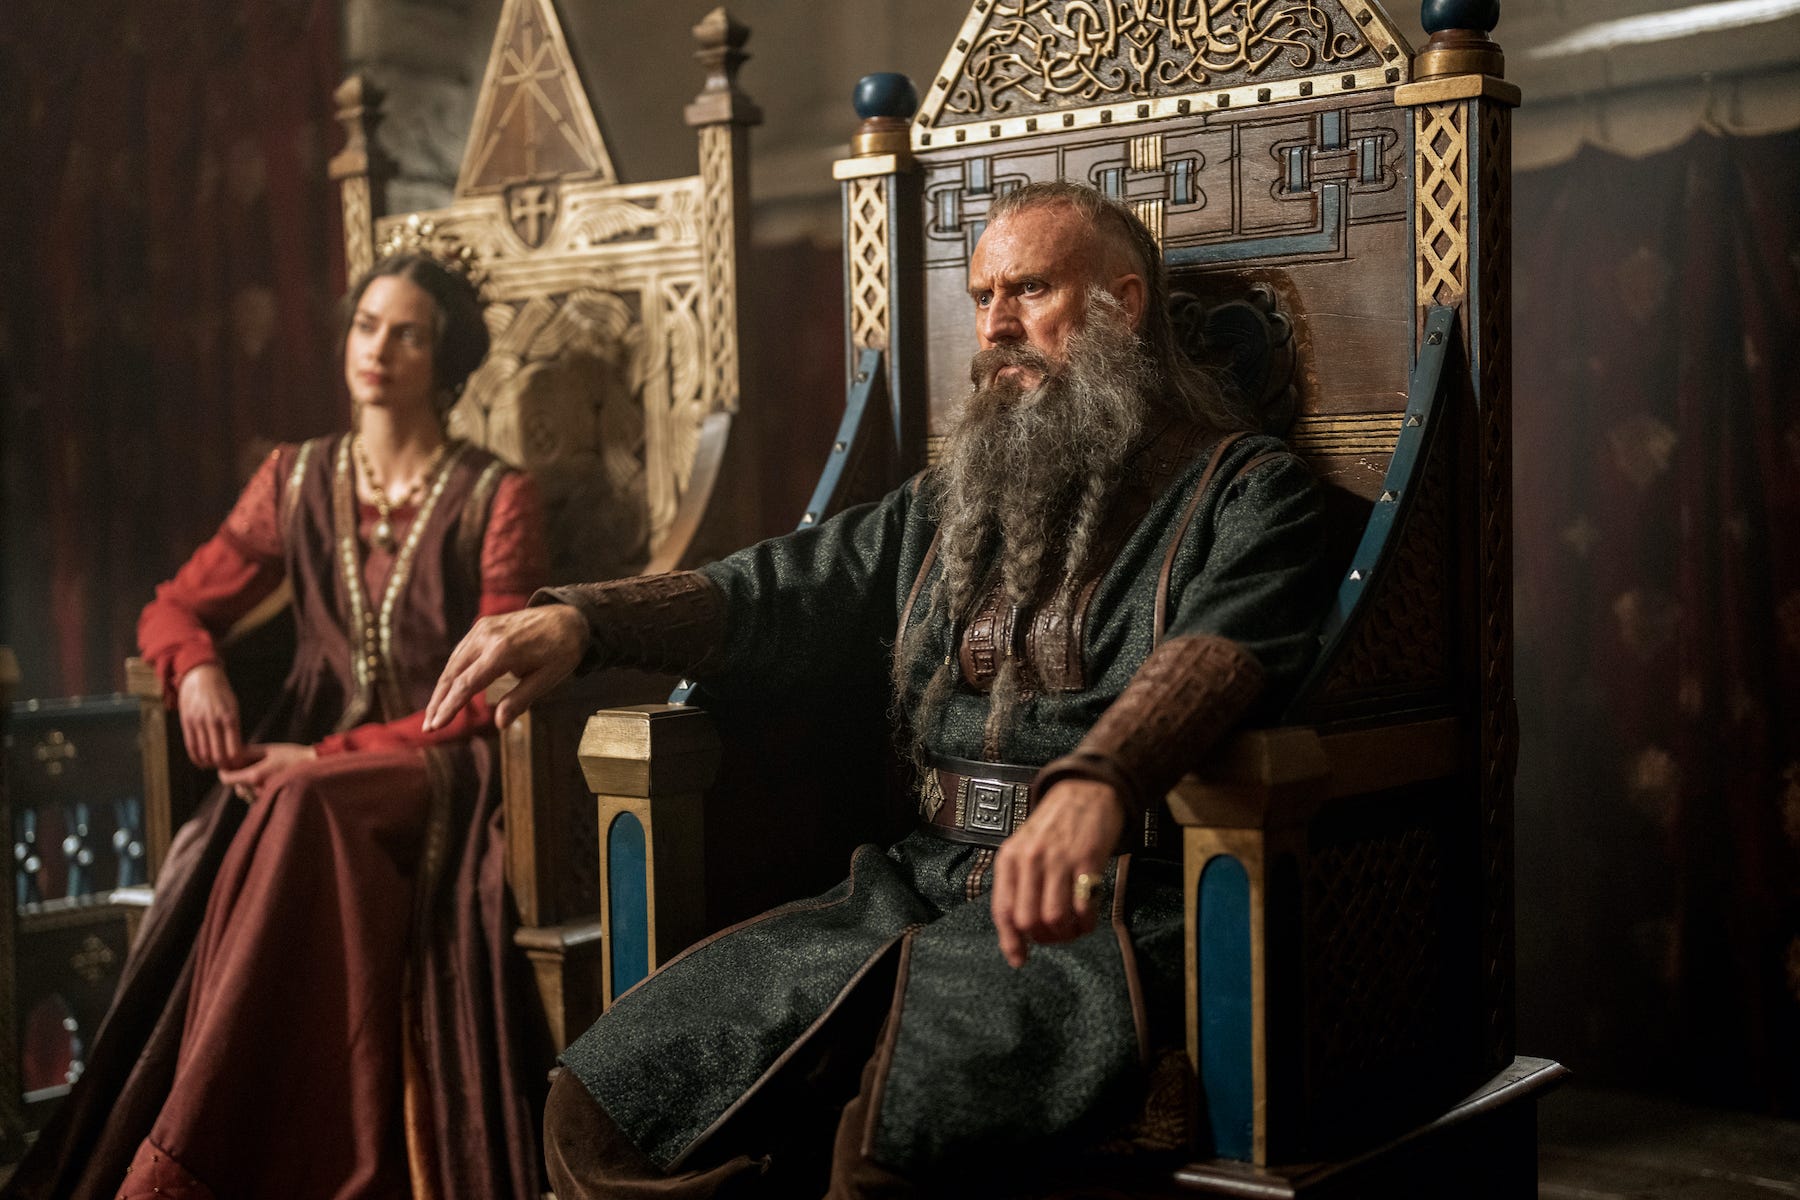 King Canute's father, Sweyn Forkbeard sitting on the English throne alongside Queen Emma of Normandy